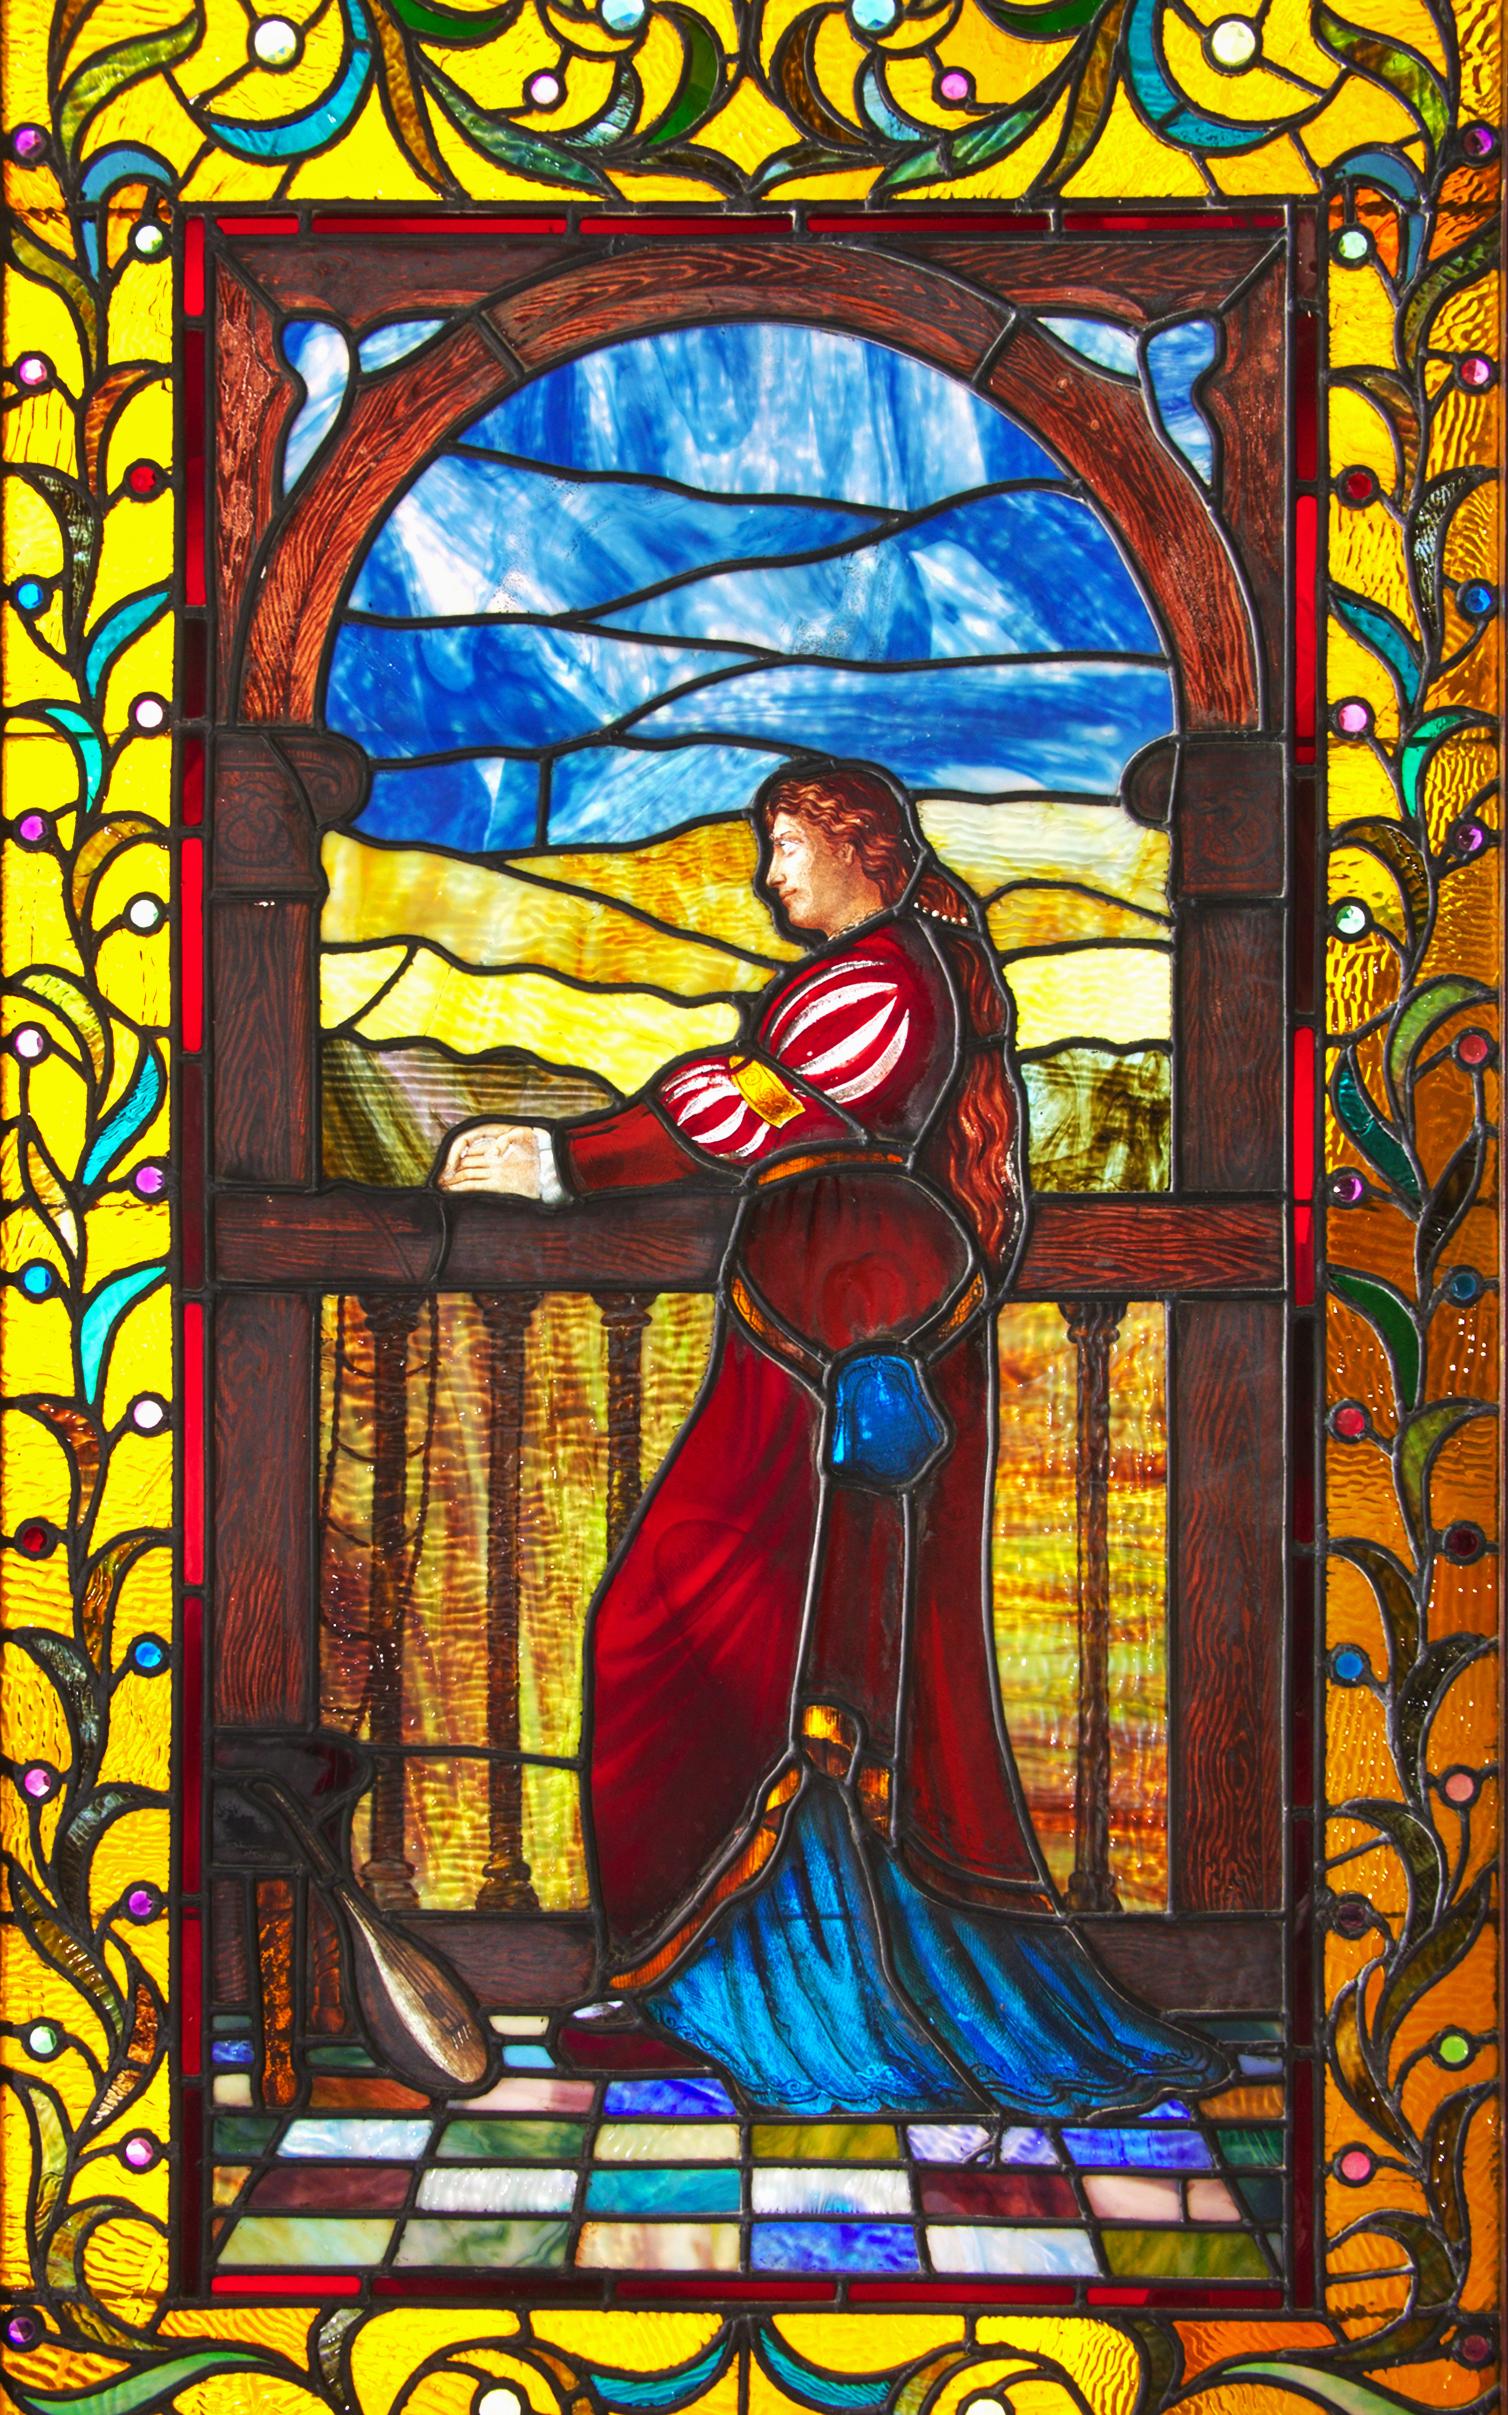 Exceptional quality stained glass panel, circa 1915, which depicts Juliet or a like maiden standing at her balcony. Incredible detail and color done by an unknown master of the art of working with glass. Condition is excellent without cracks or